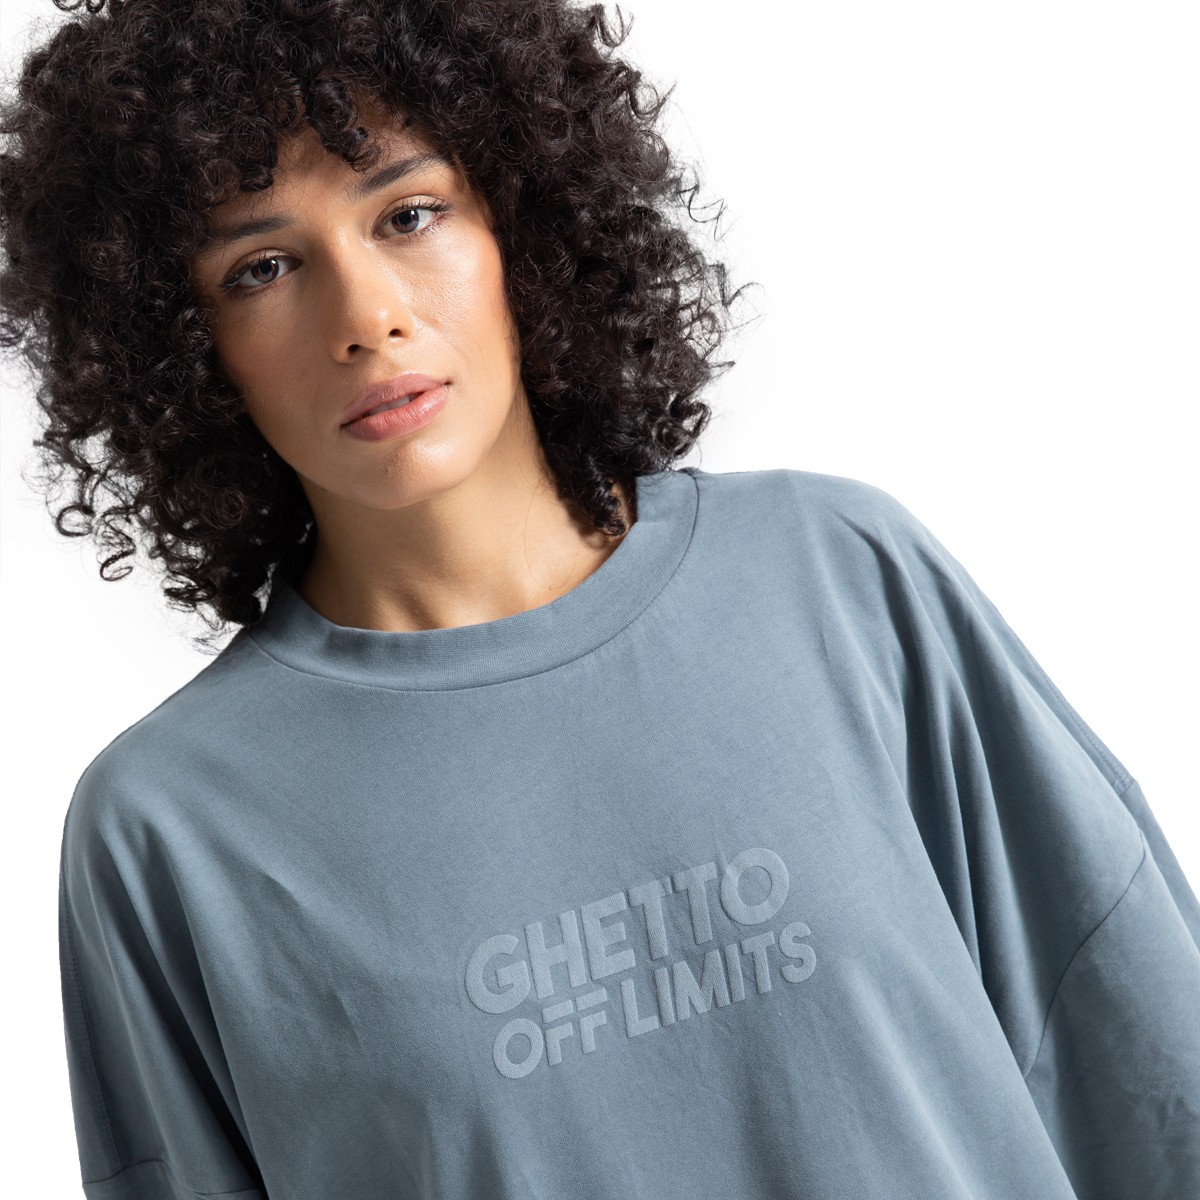 Ghetto Off Limits The Roots Battleship Gray Oversize T-Shirt TS-10001